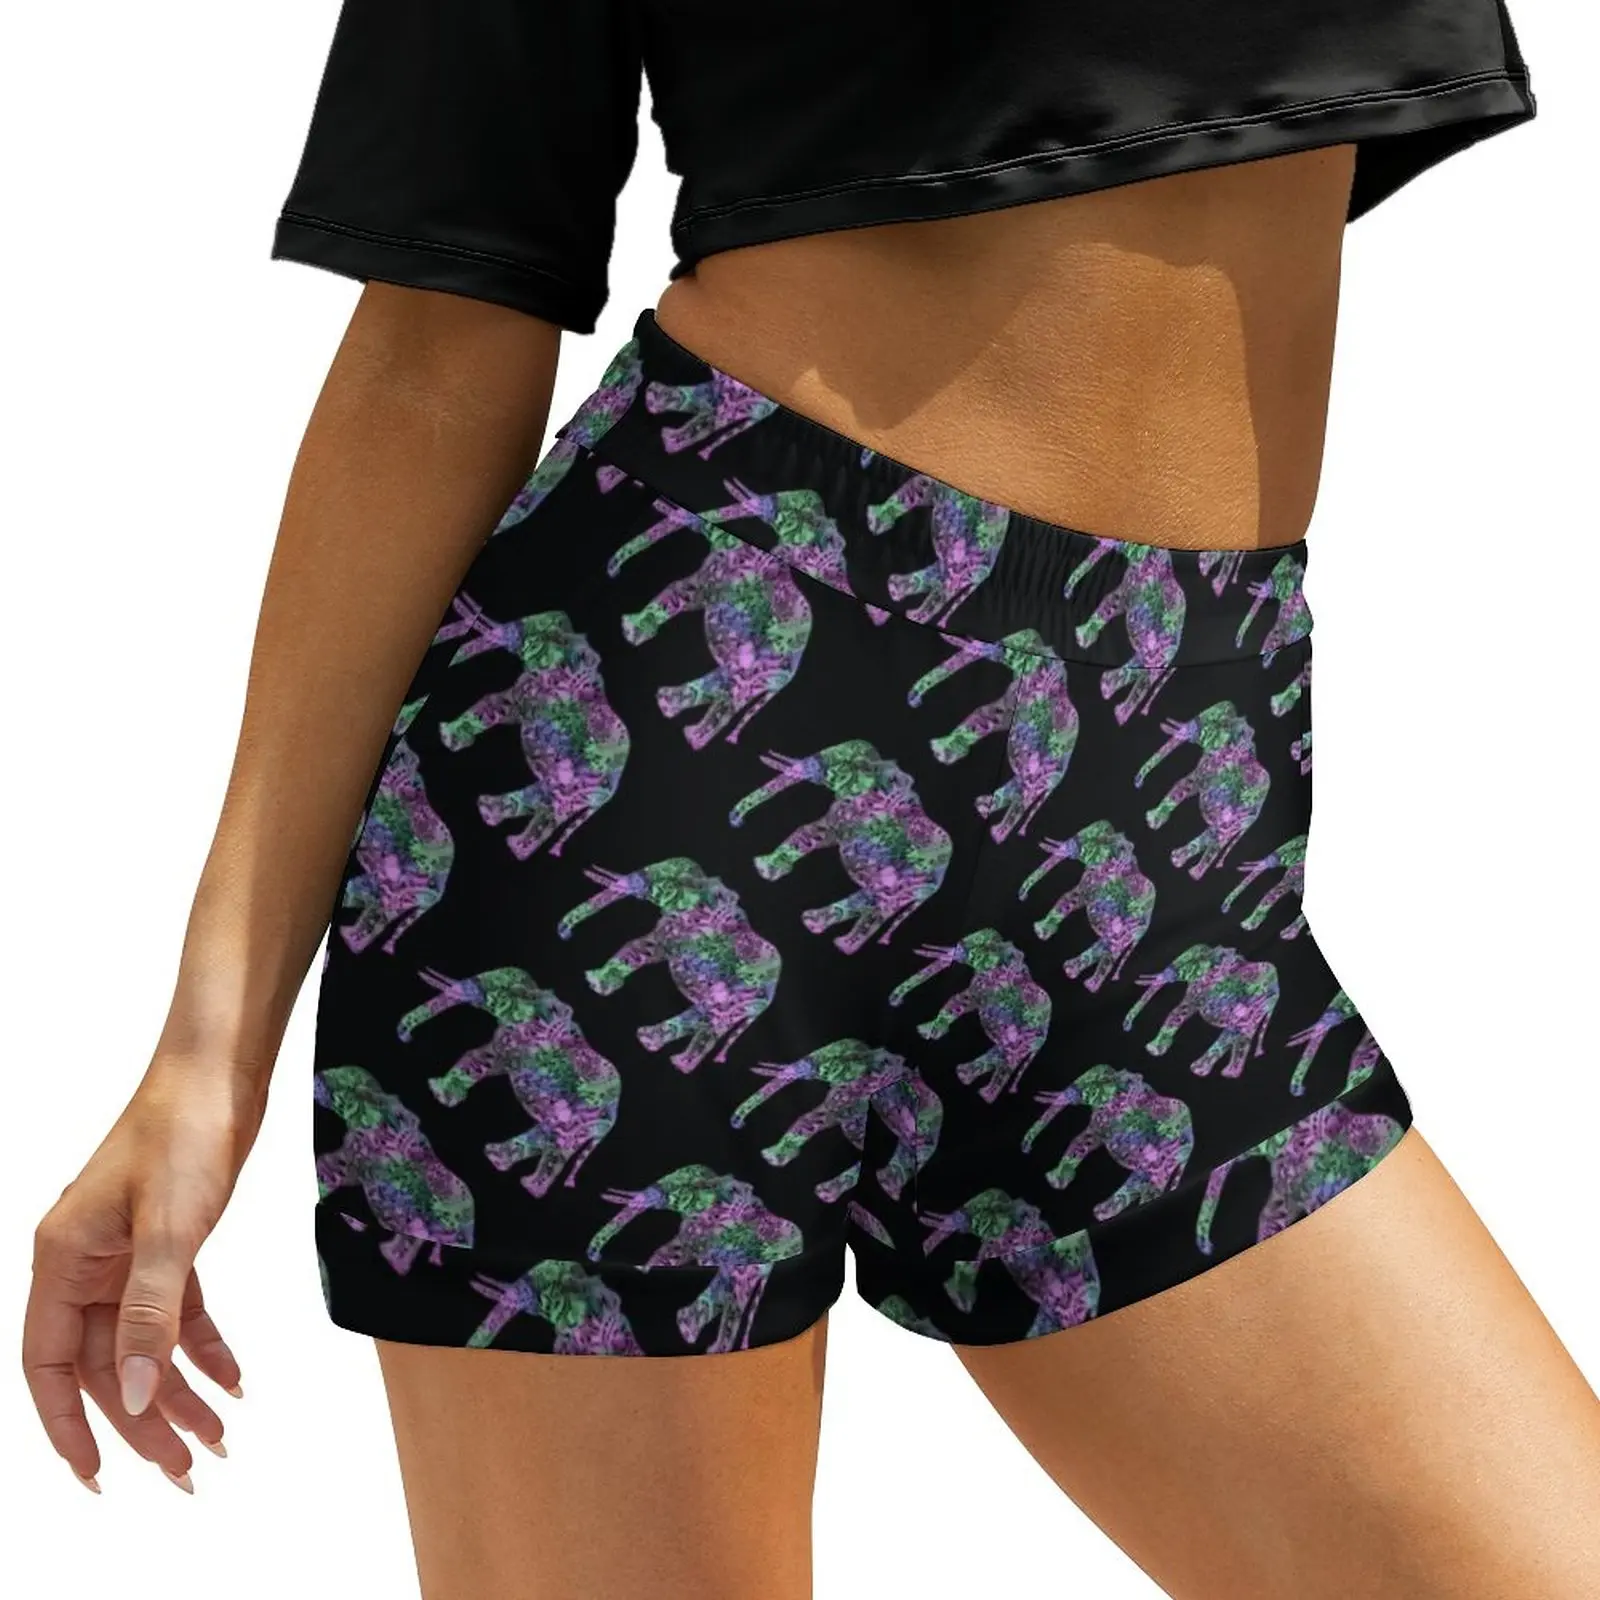 Neon Elephant Shorts Colorful Tribal Print Oversize Streetwear Shorts Sexy Short Pants Female Graphic Bottoms